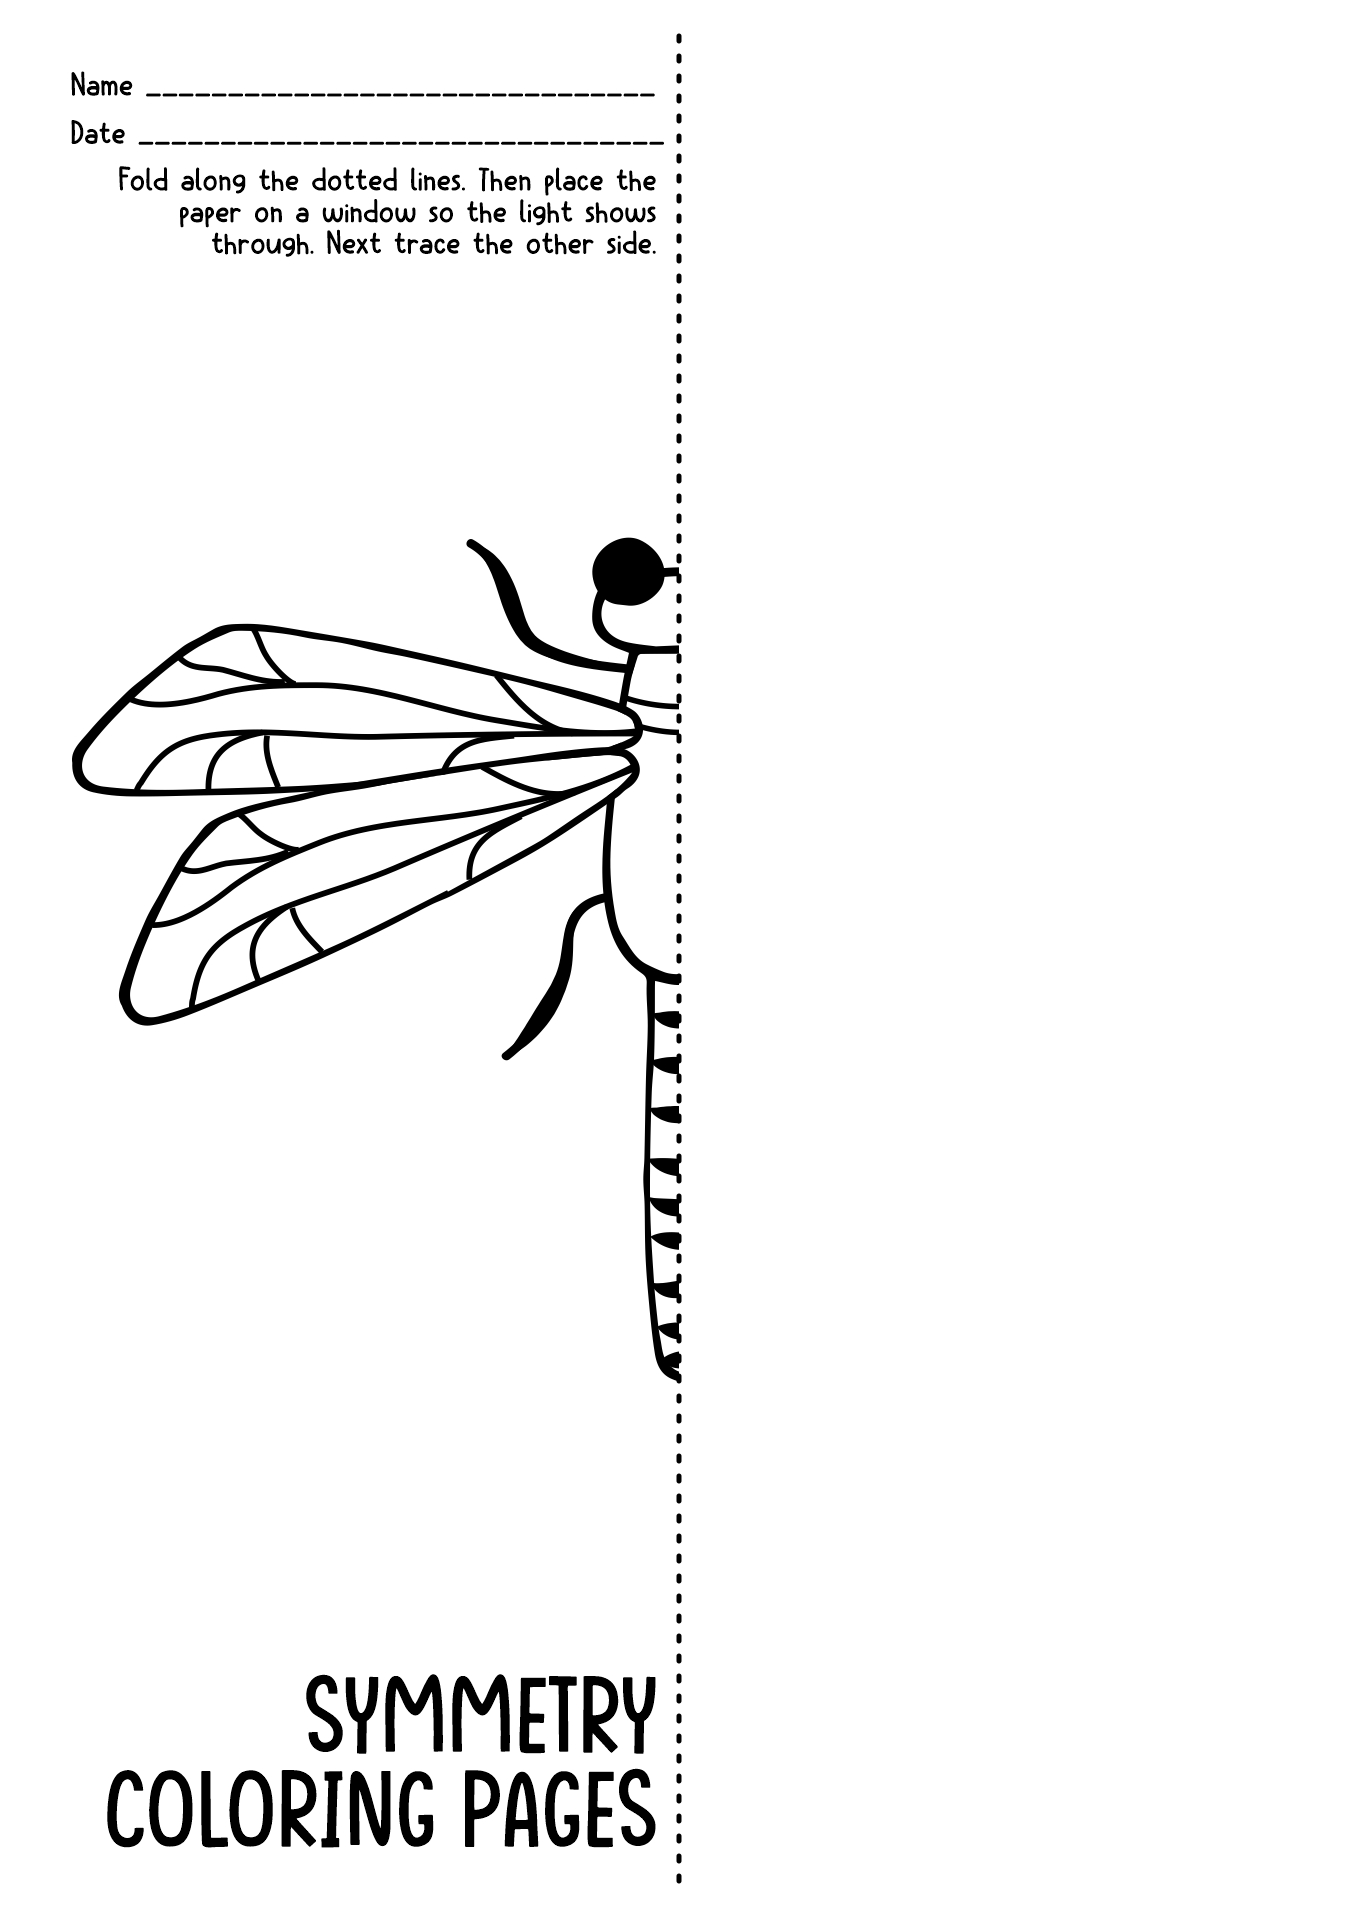 7 Best Images of Kids Bug And Insects Worksheets - Insect for Kids to ...